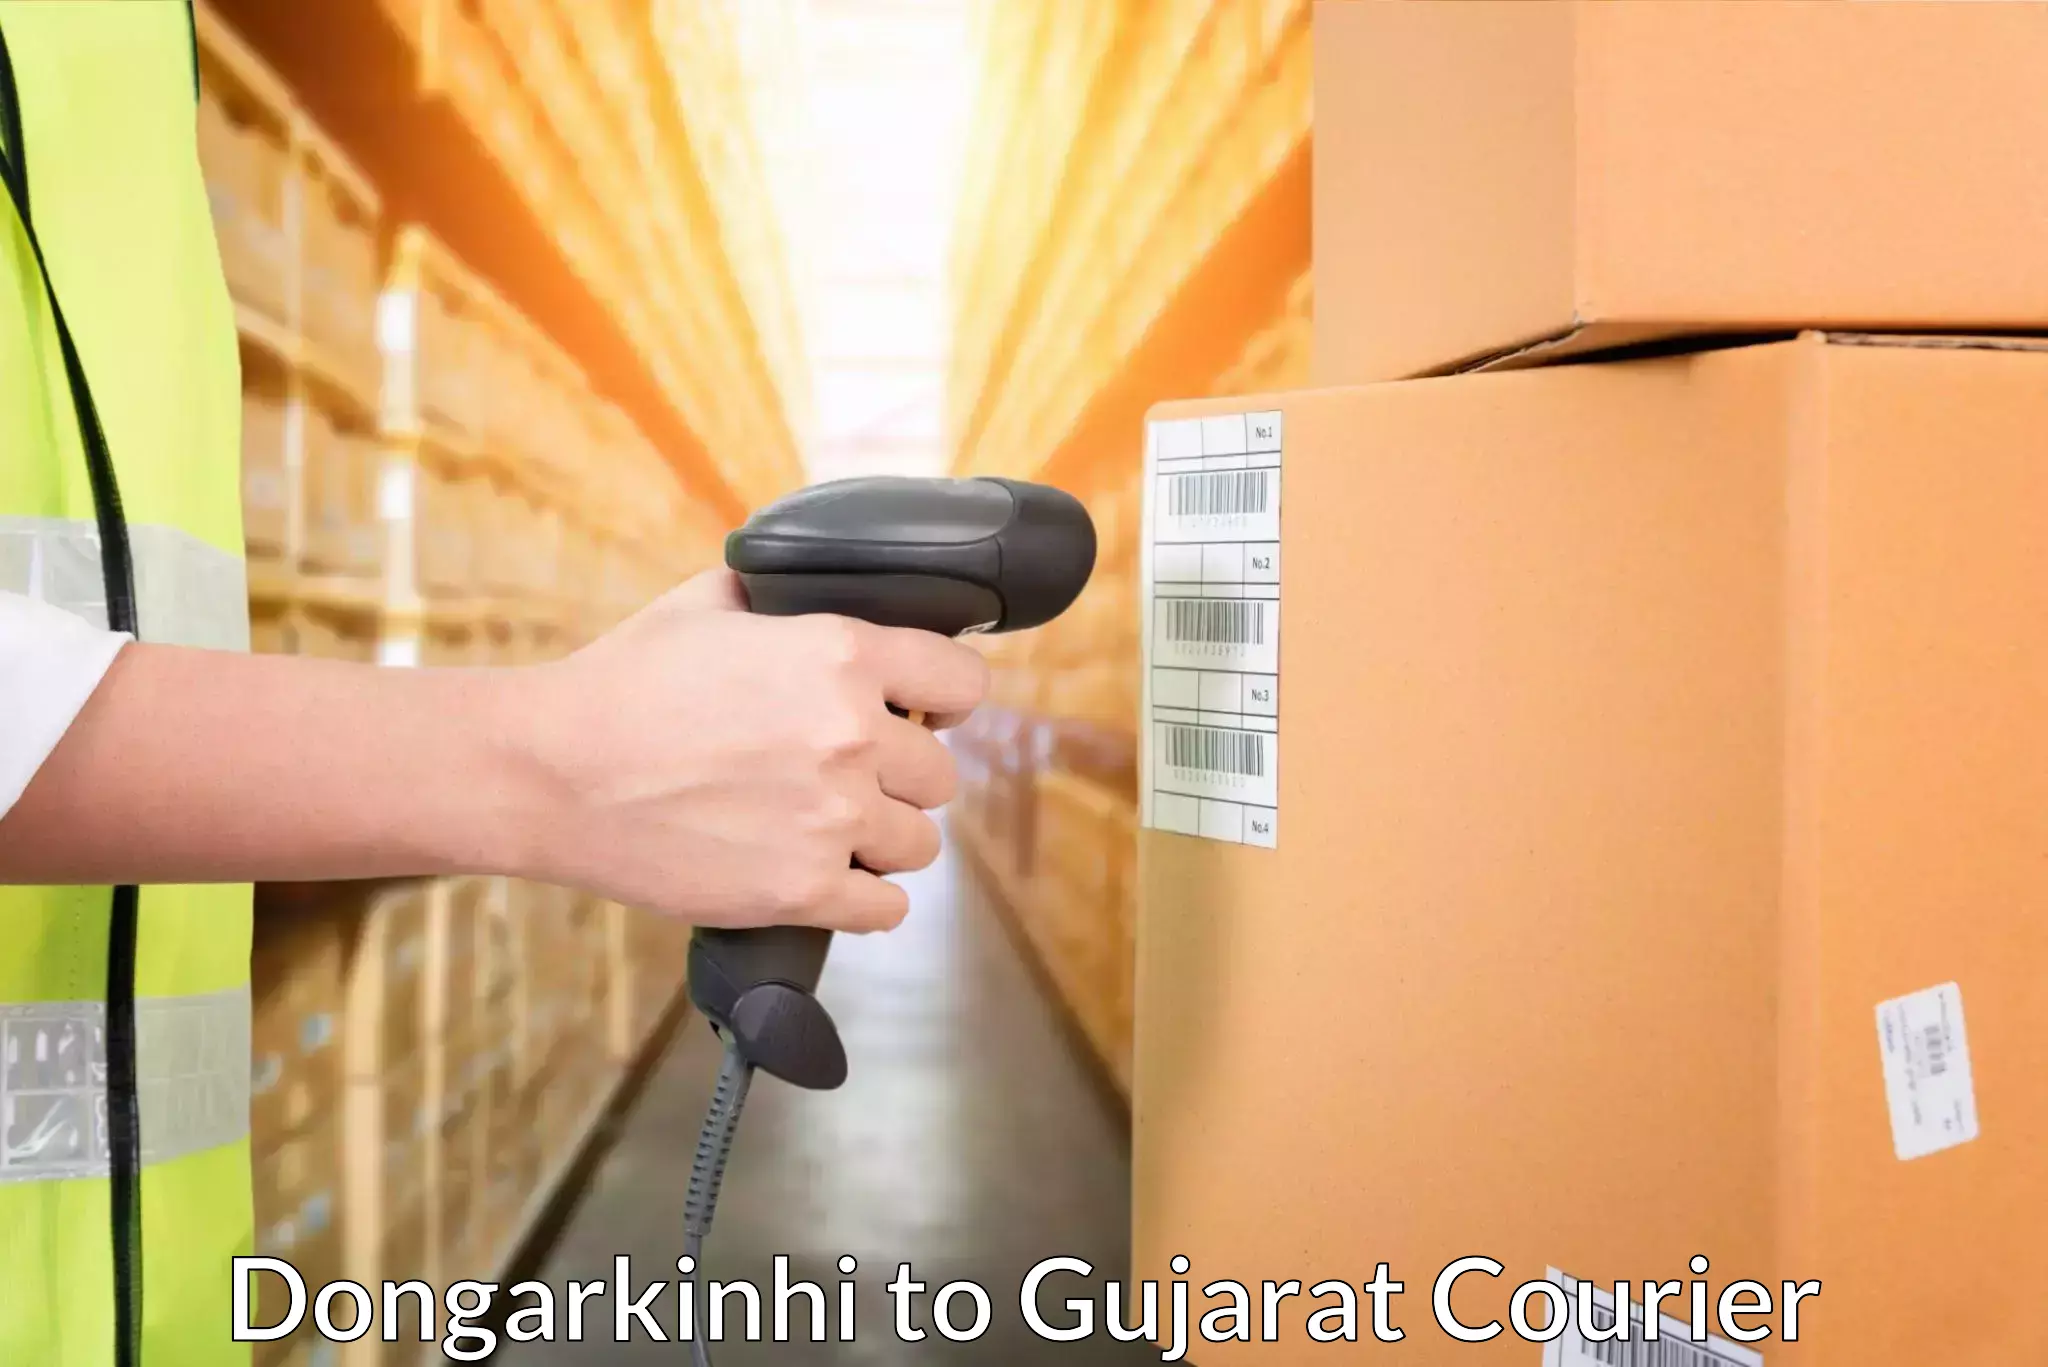 Comprehensive shipping services in Dongarkinhi to Gujarat